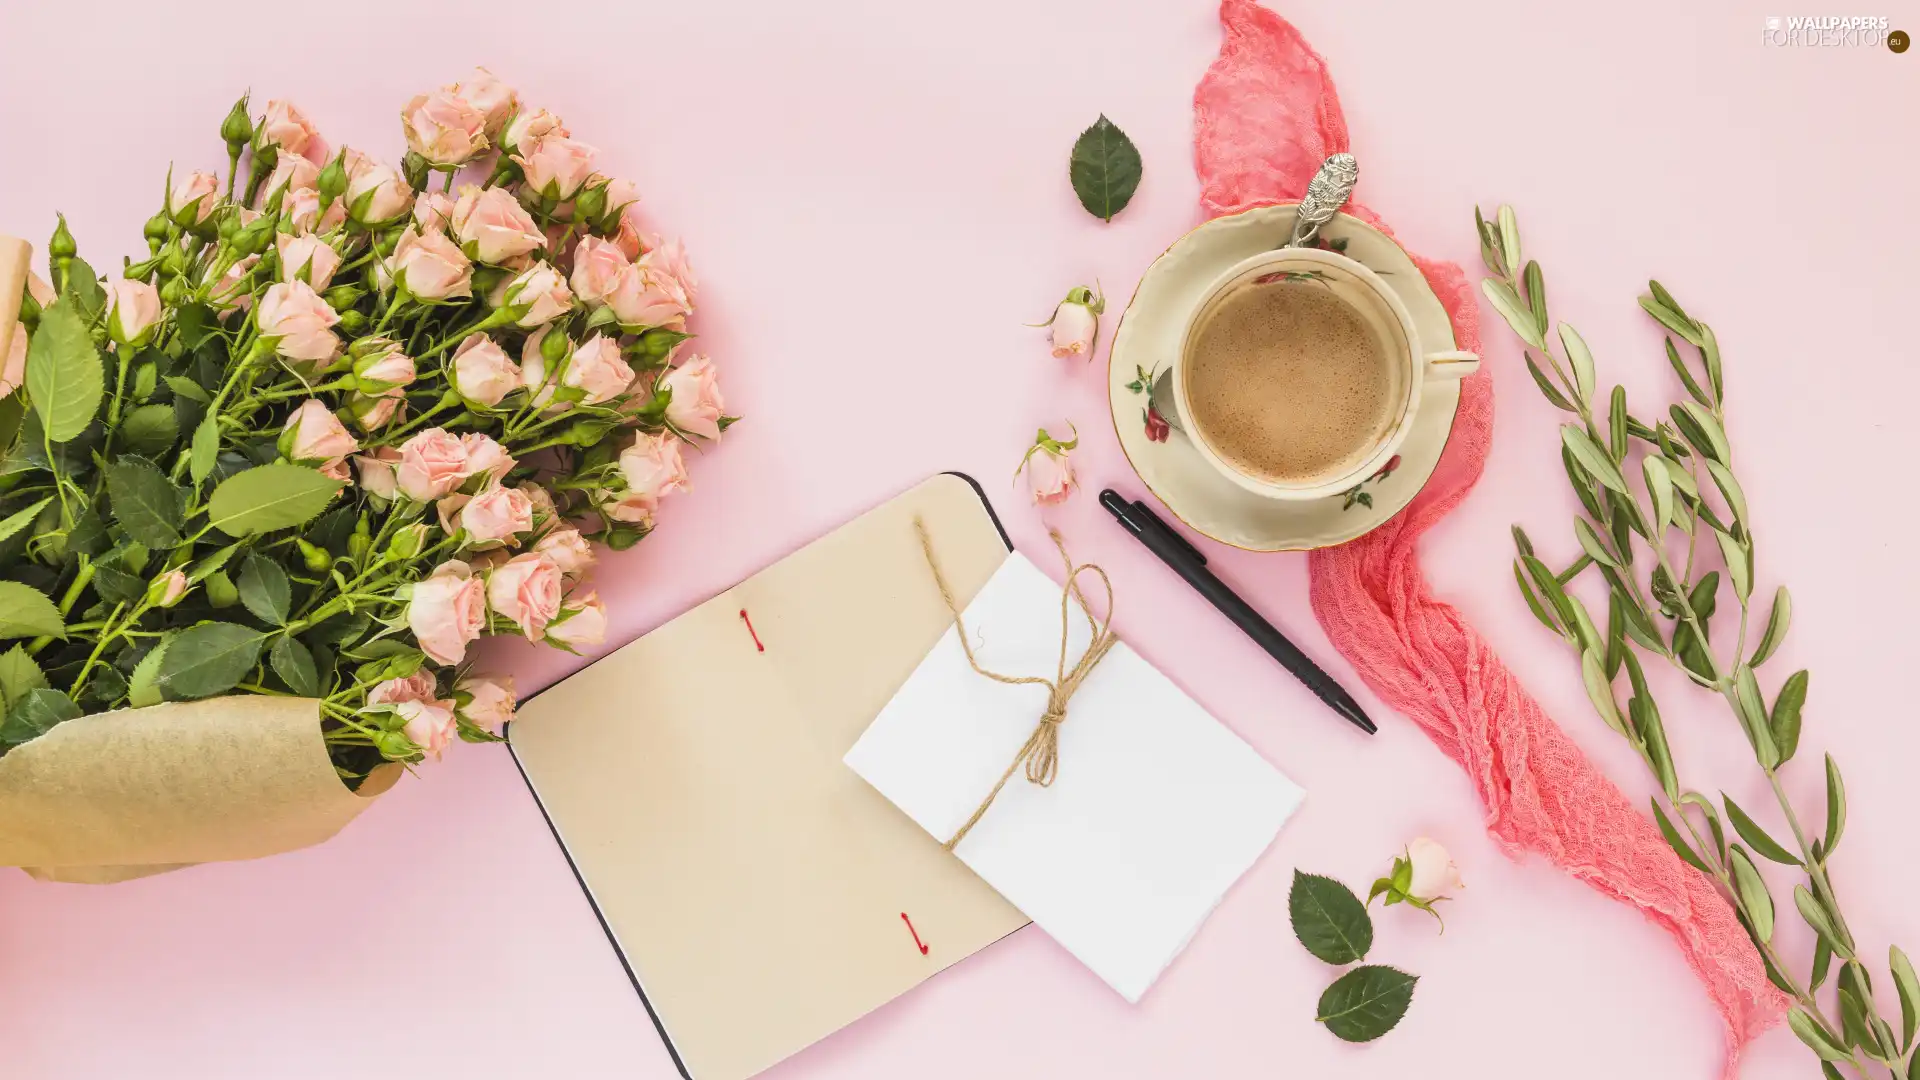 bouquet, Flowers, roses, note-book, coffee, leaves, cup, saucer, pen